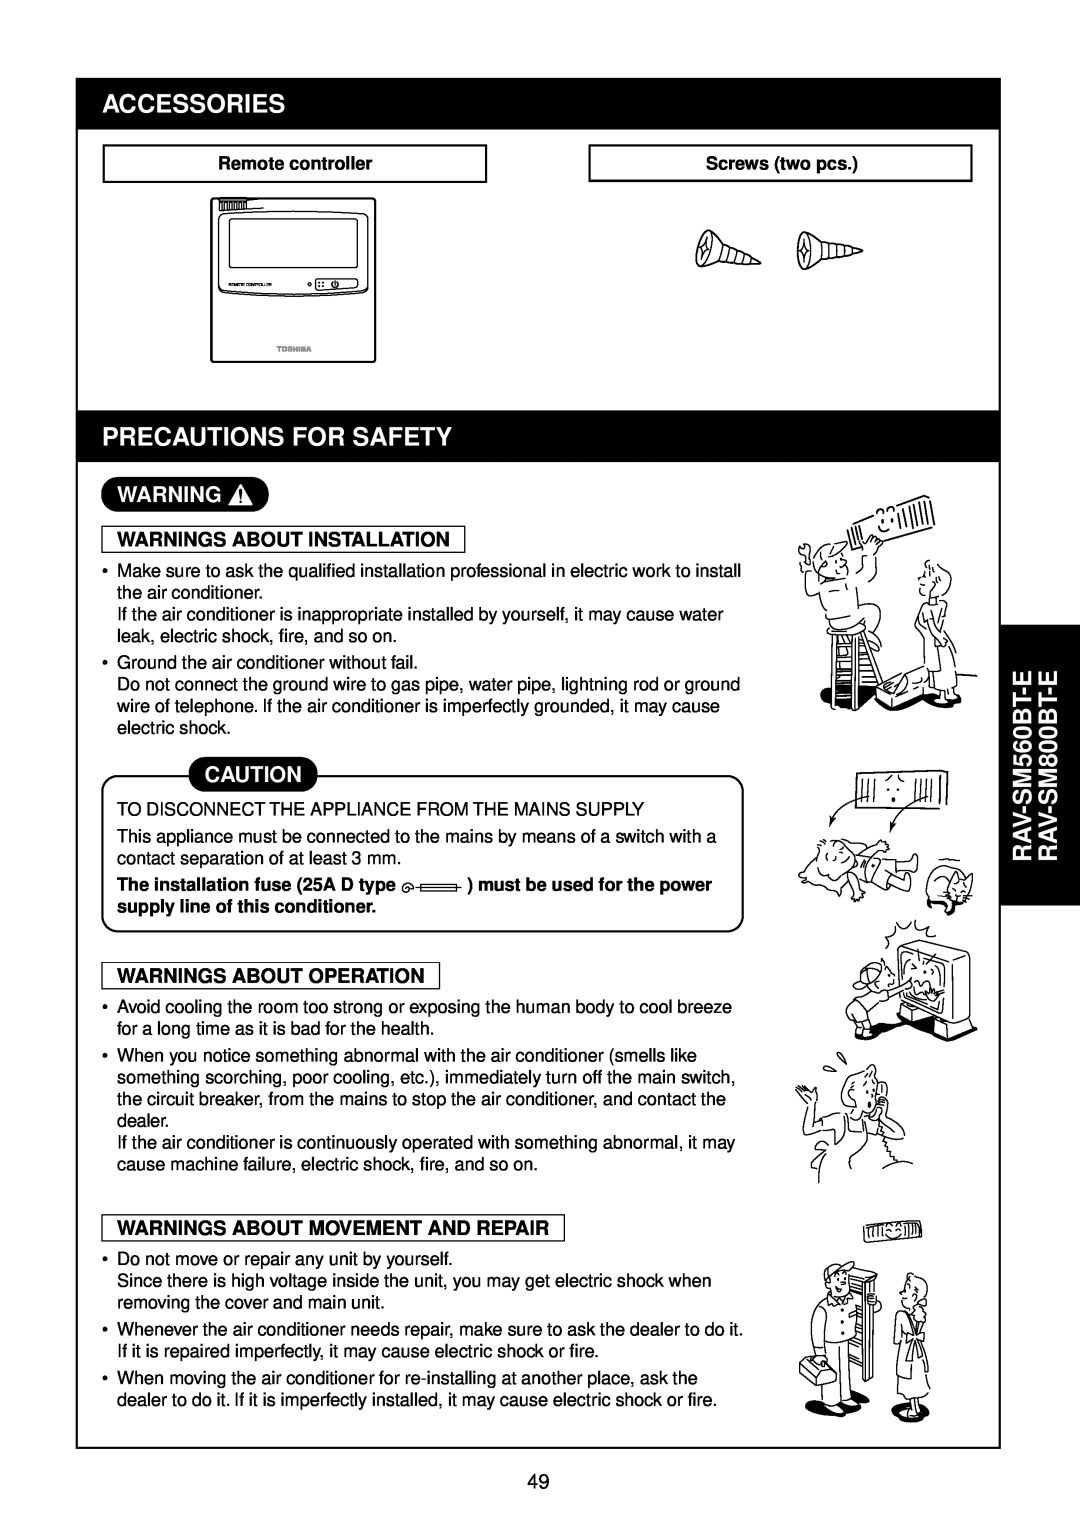 Toshiba RAM-SM800AT-E RAV-SM560BT-E RAV-SM800BT-E, Warnings About Operation, Accessories, Precautions For Safety 